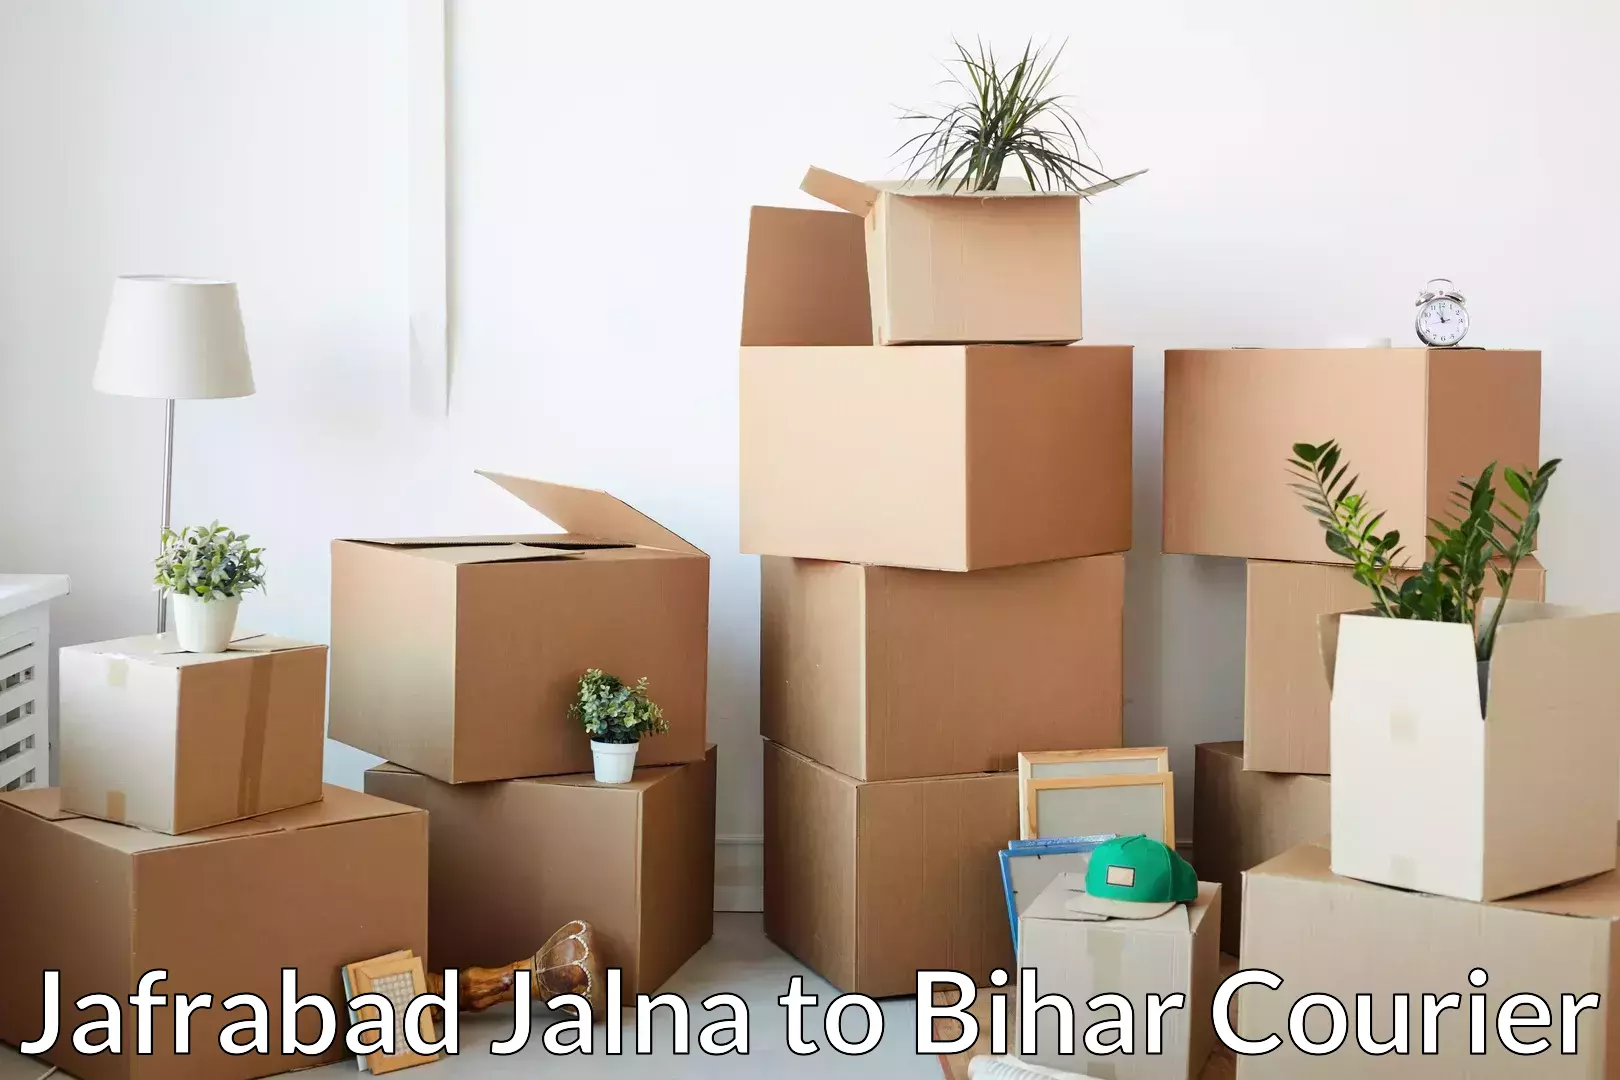 Trusted relocation experts Jafrabad Jalna to Bihta